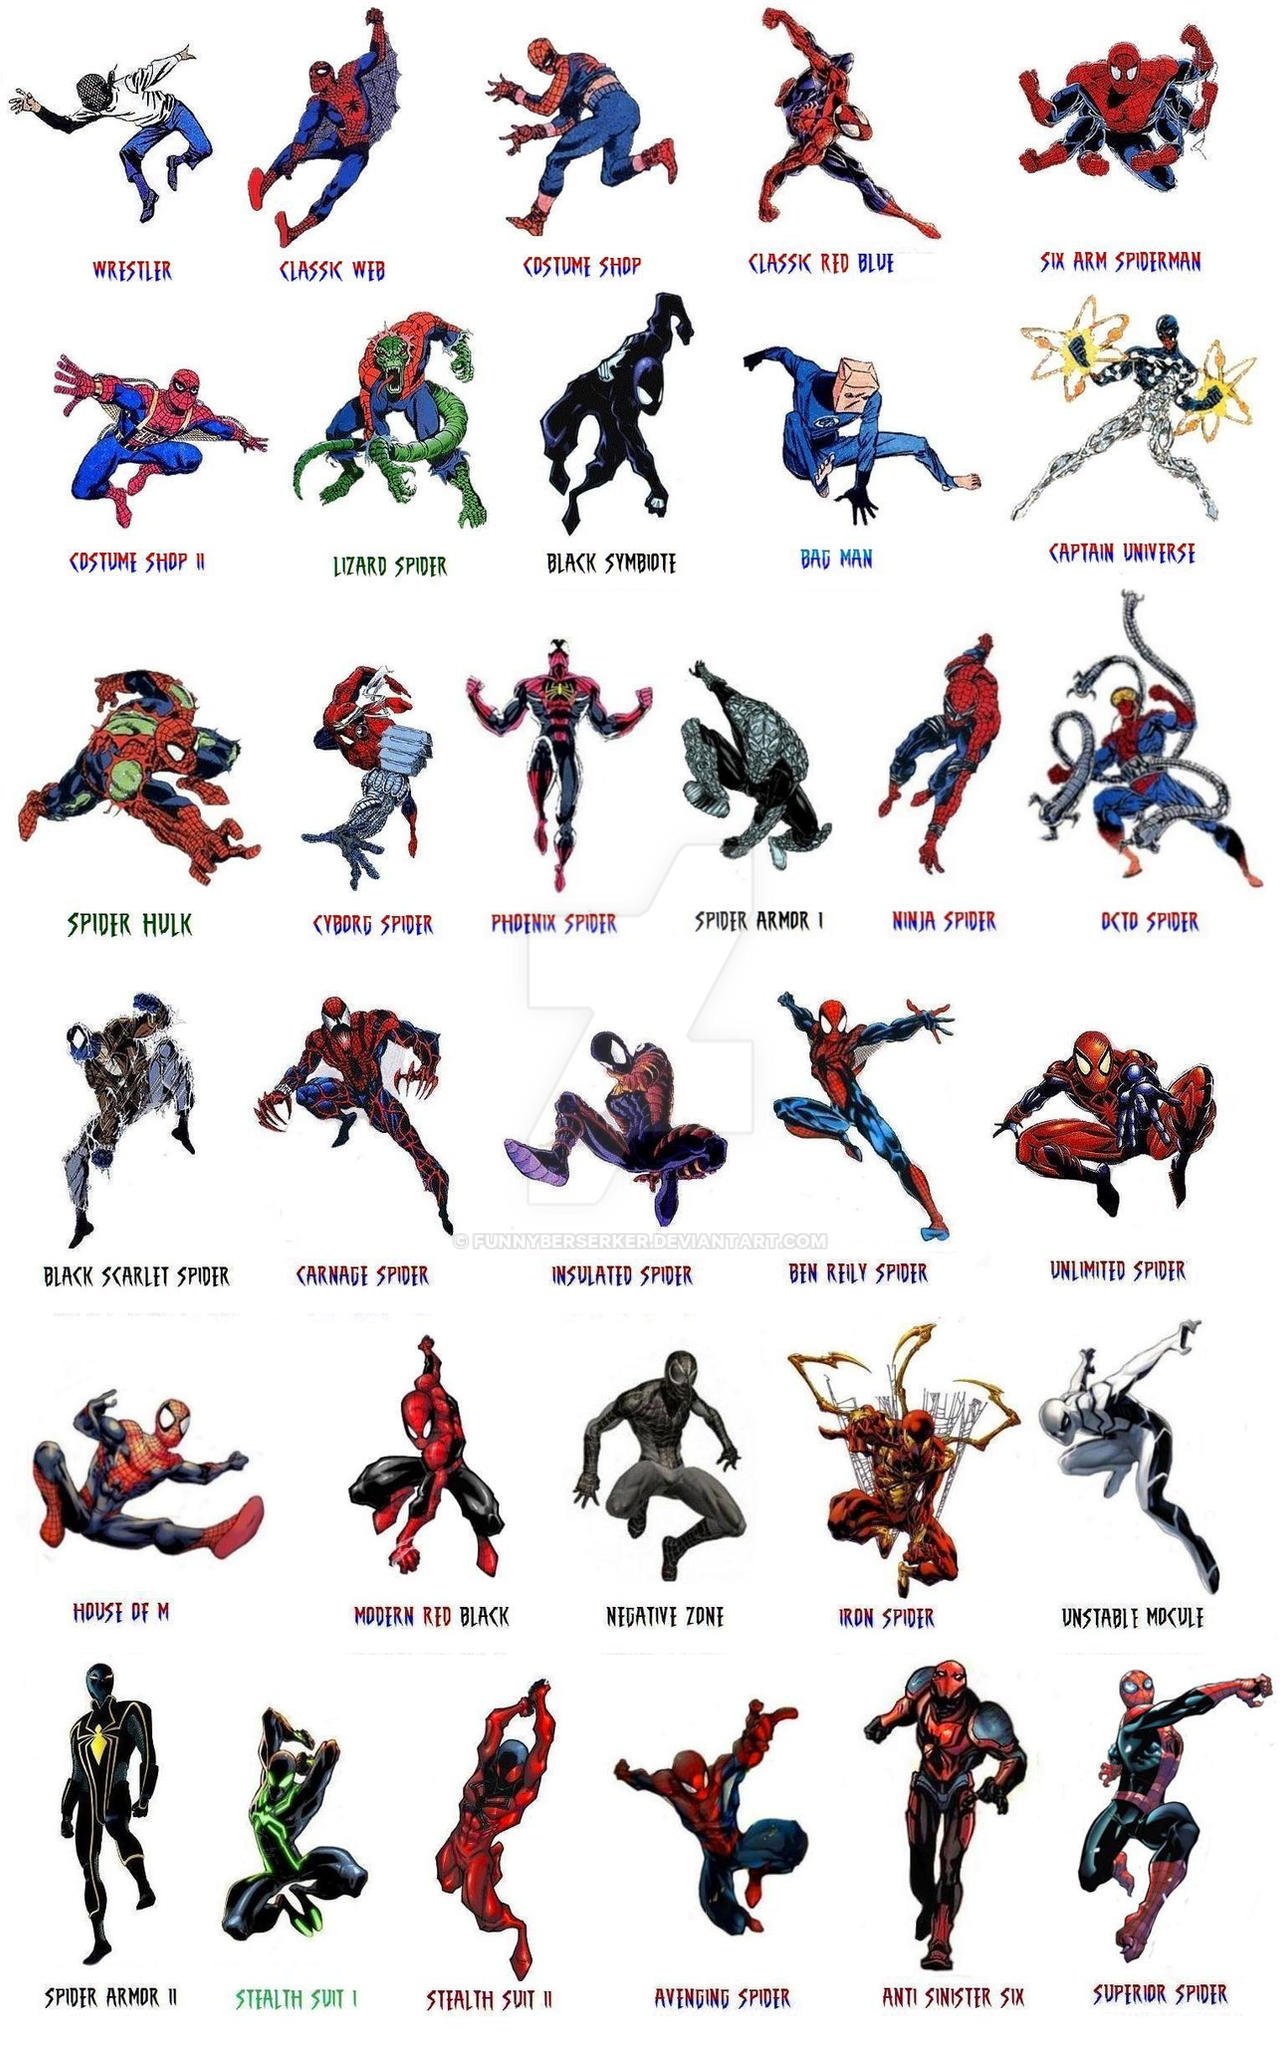 spiderman_costume_changes_over_years__ea